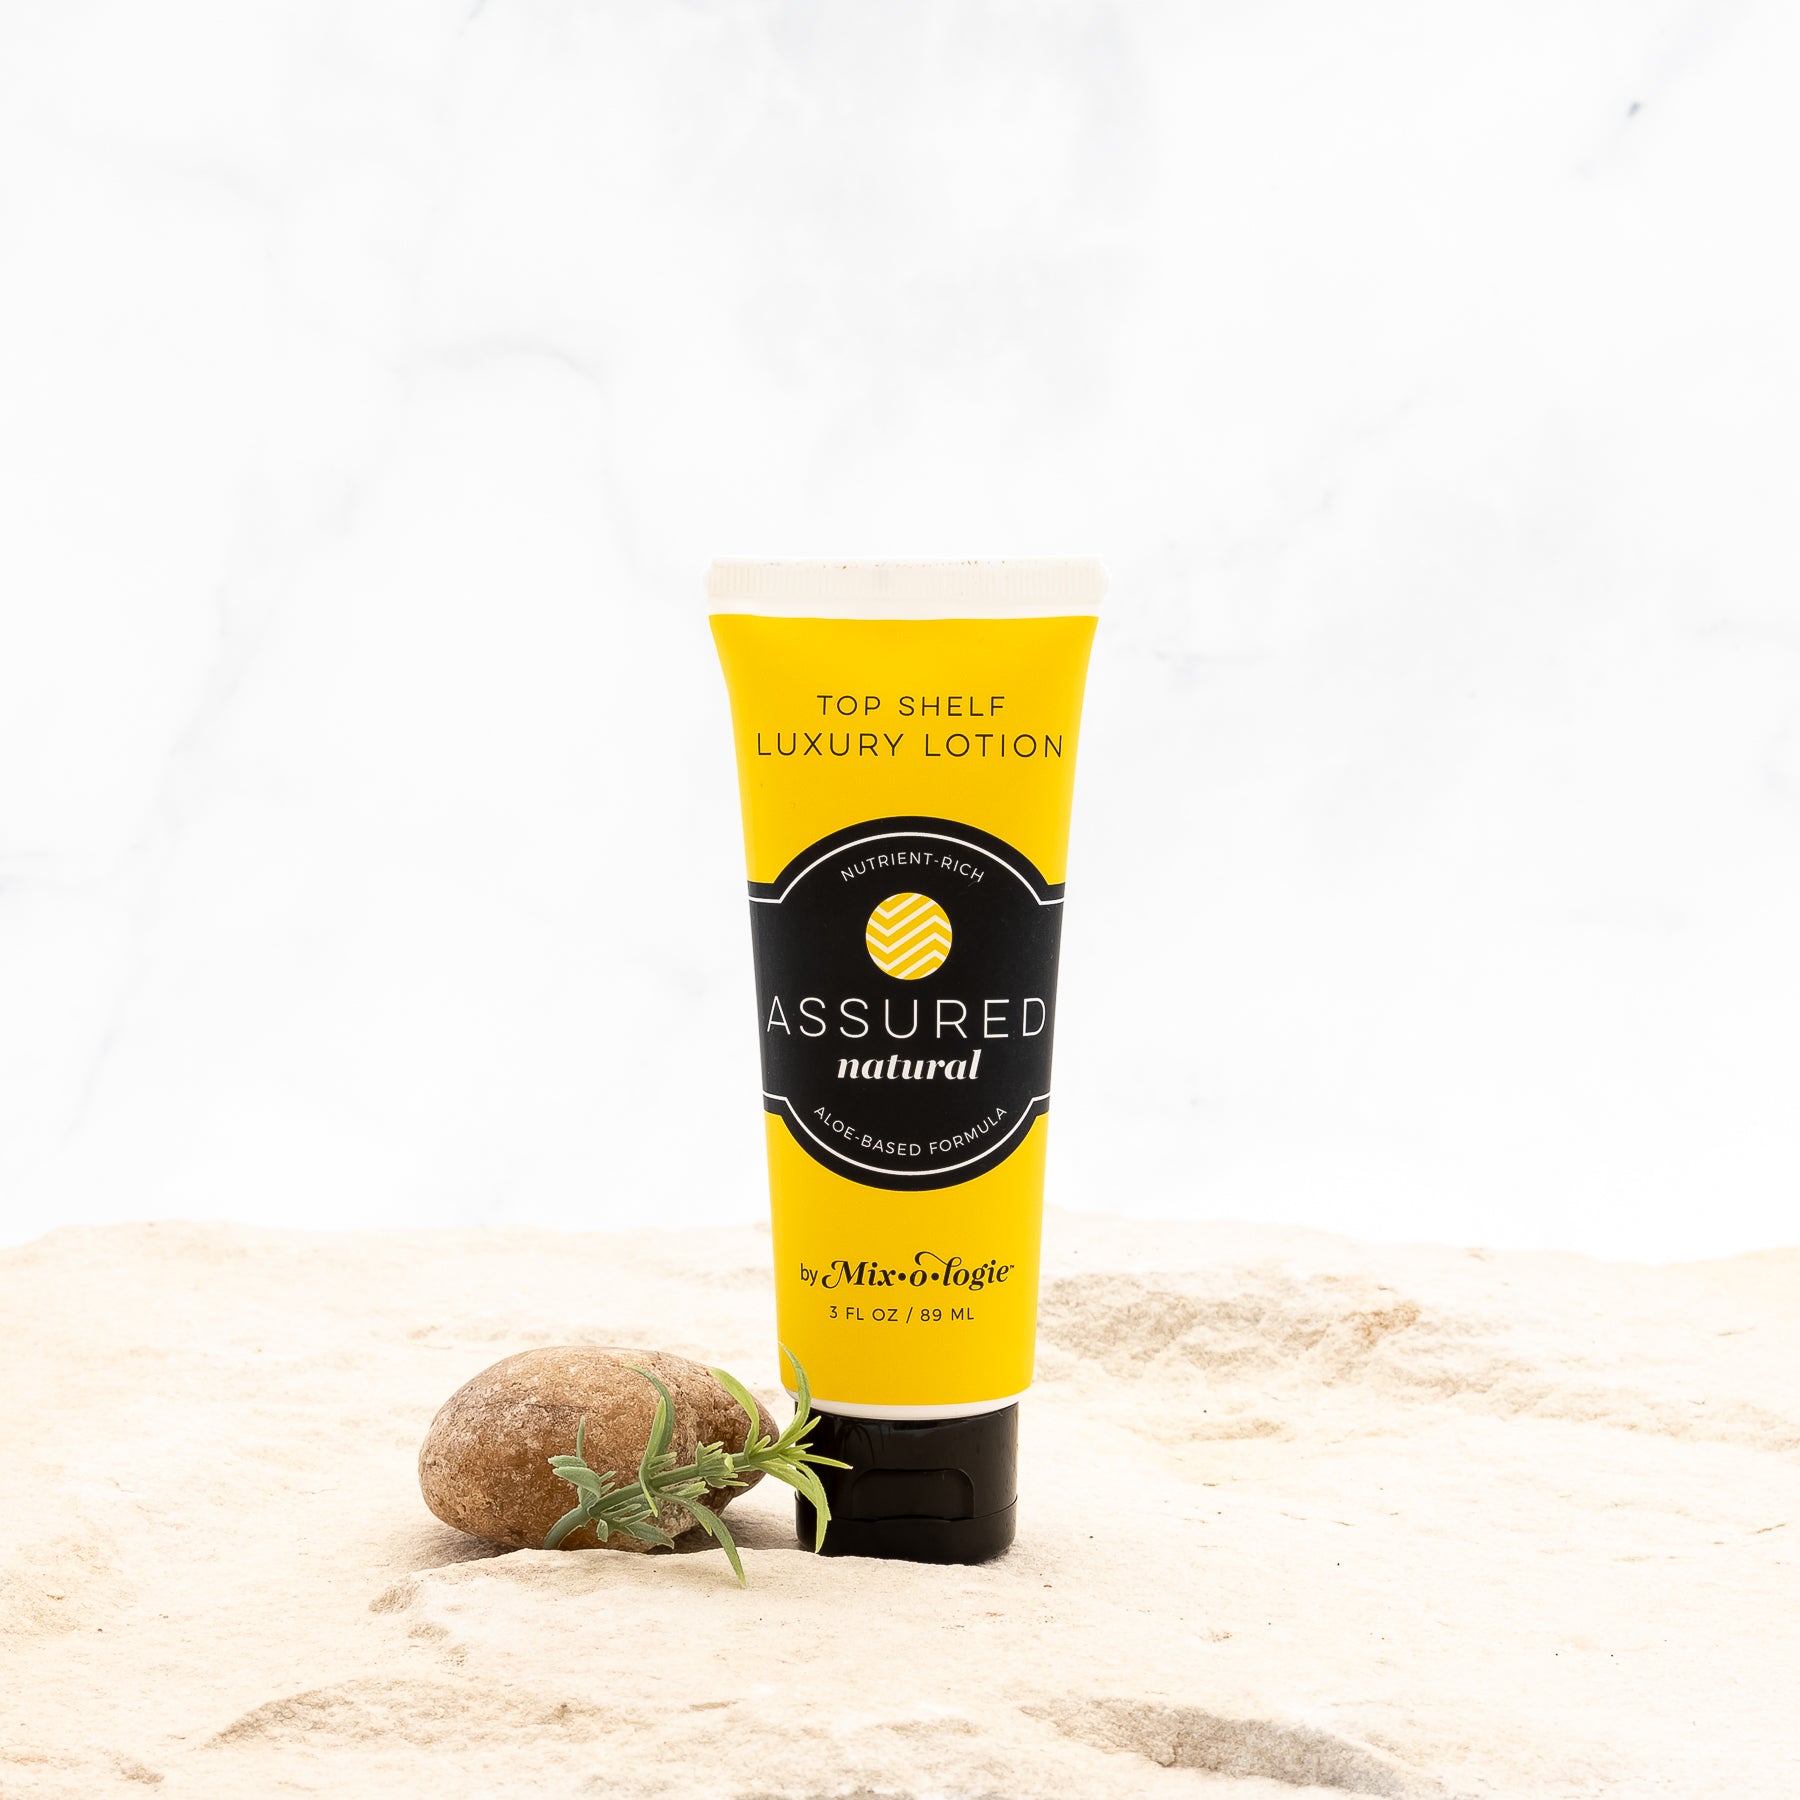 Mixologie's Top Shelf Luxury Lotion with aloe-based formula scented with Assured (natural) in 3 FL OZ plastic tube. 